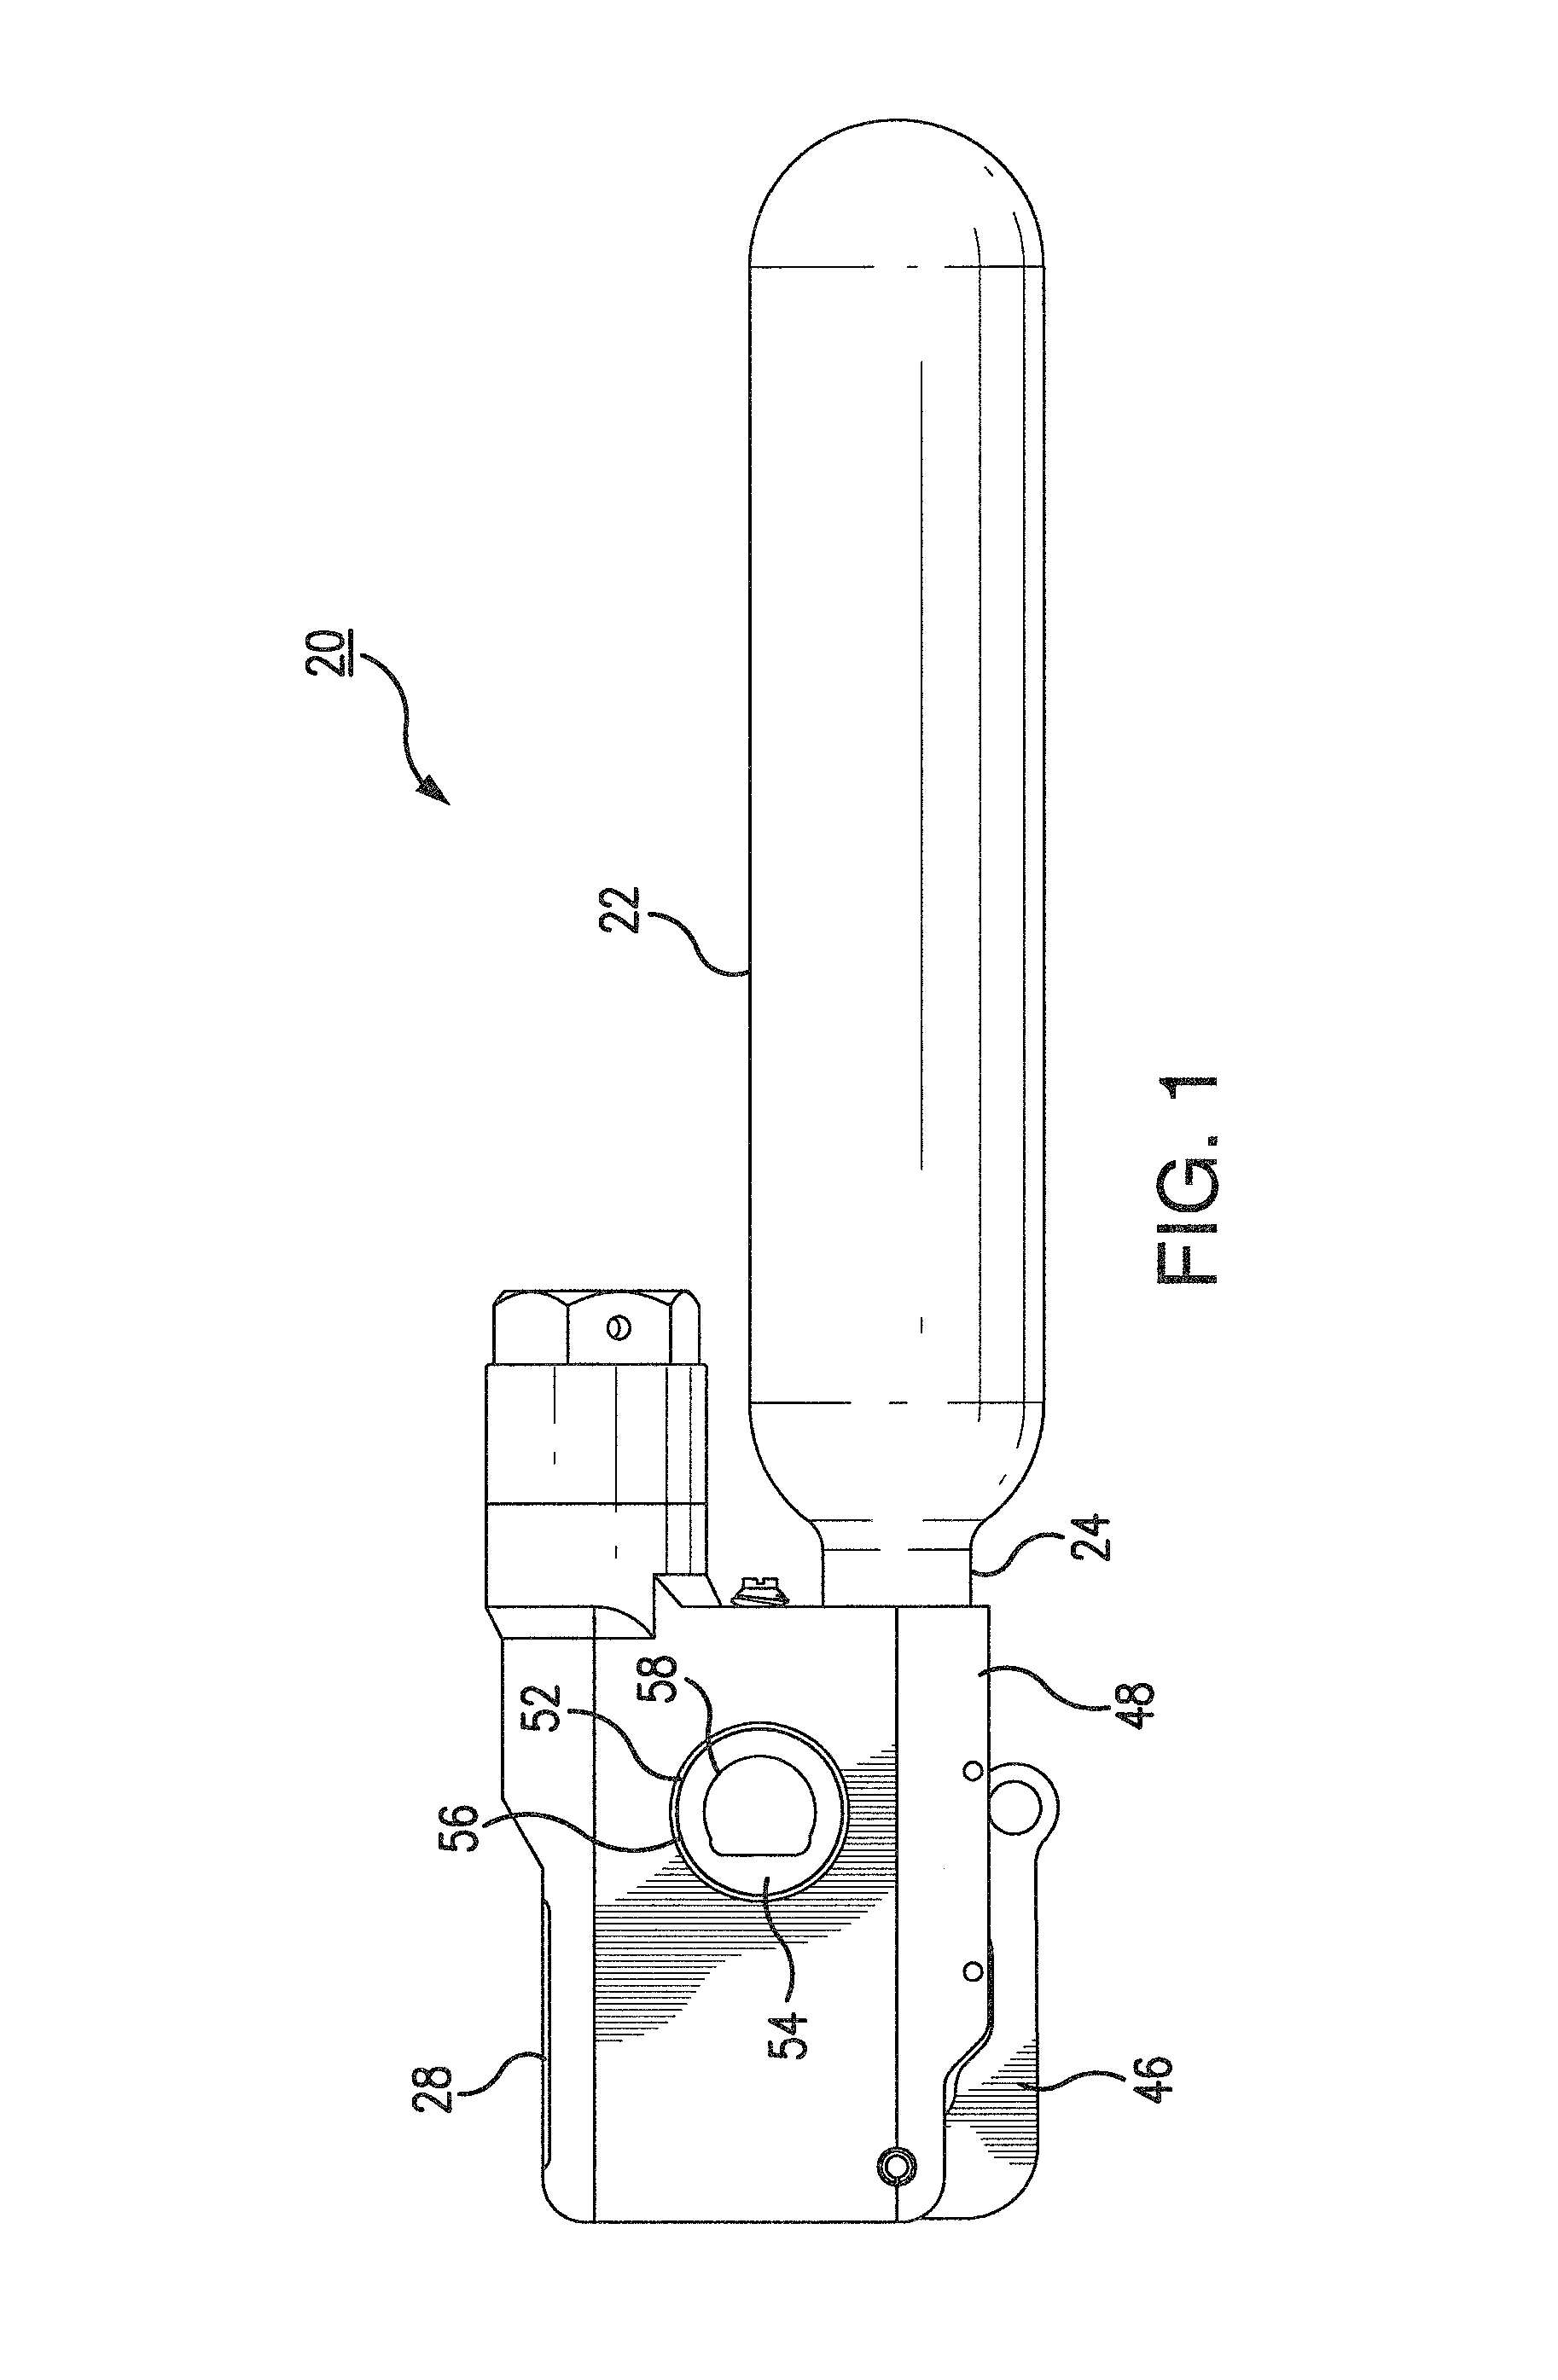 Water actuated pressurized gas release device